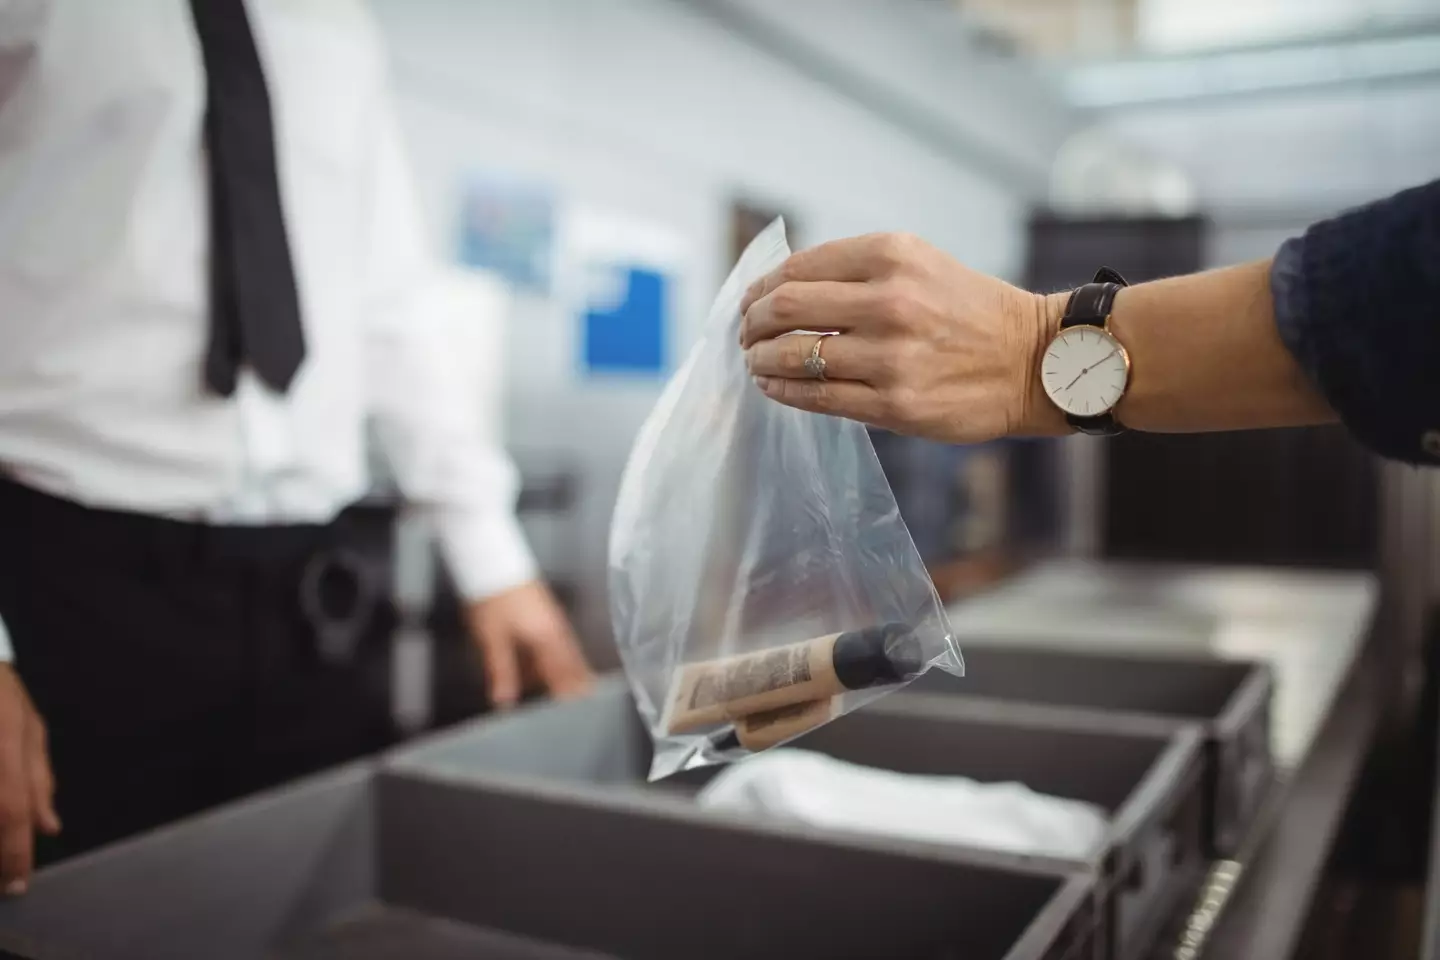 Small, clear plastic bags could soon be a thing of the past.